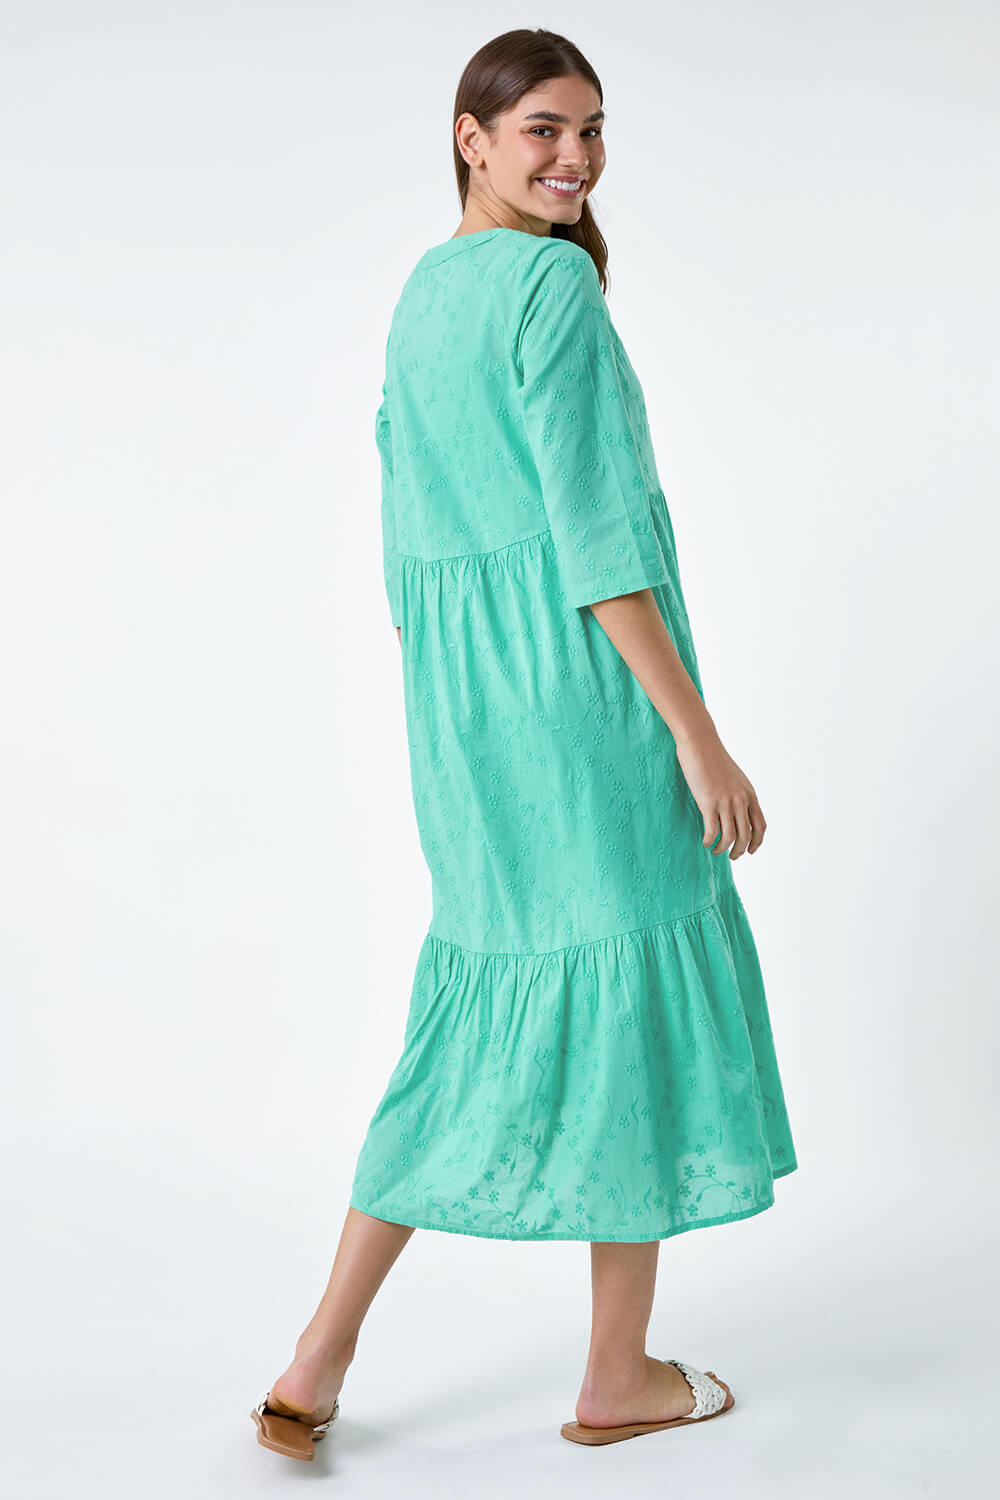 Mint Embroidered Tiered Cotton Midi Dress, Image 3 of 5